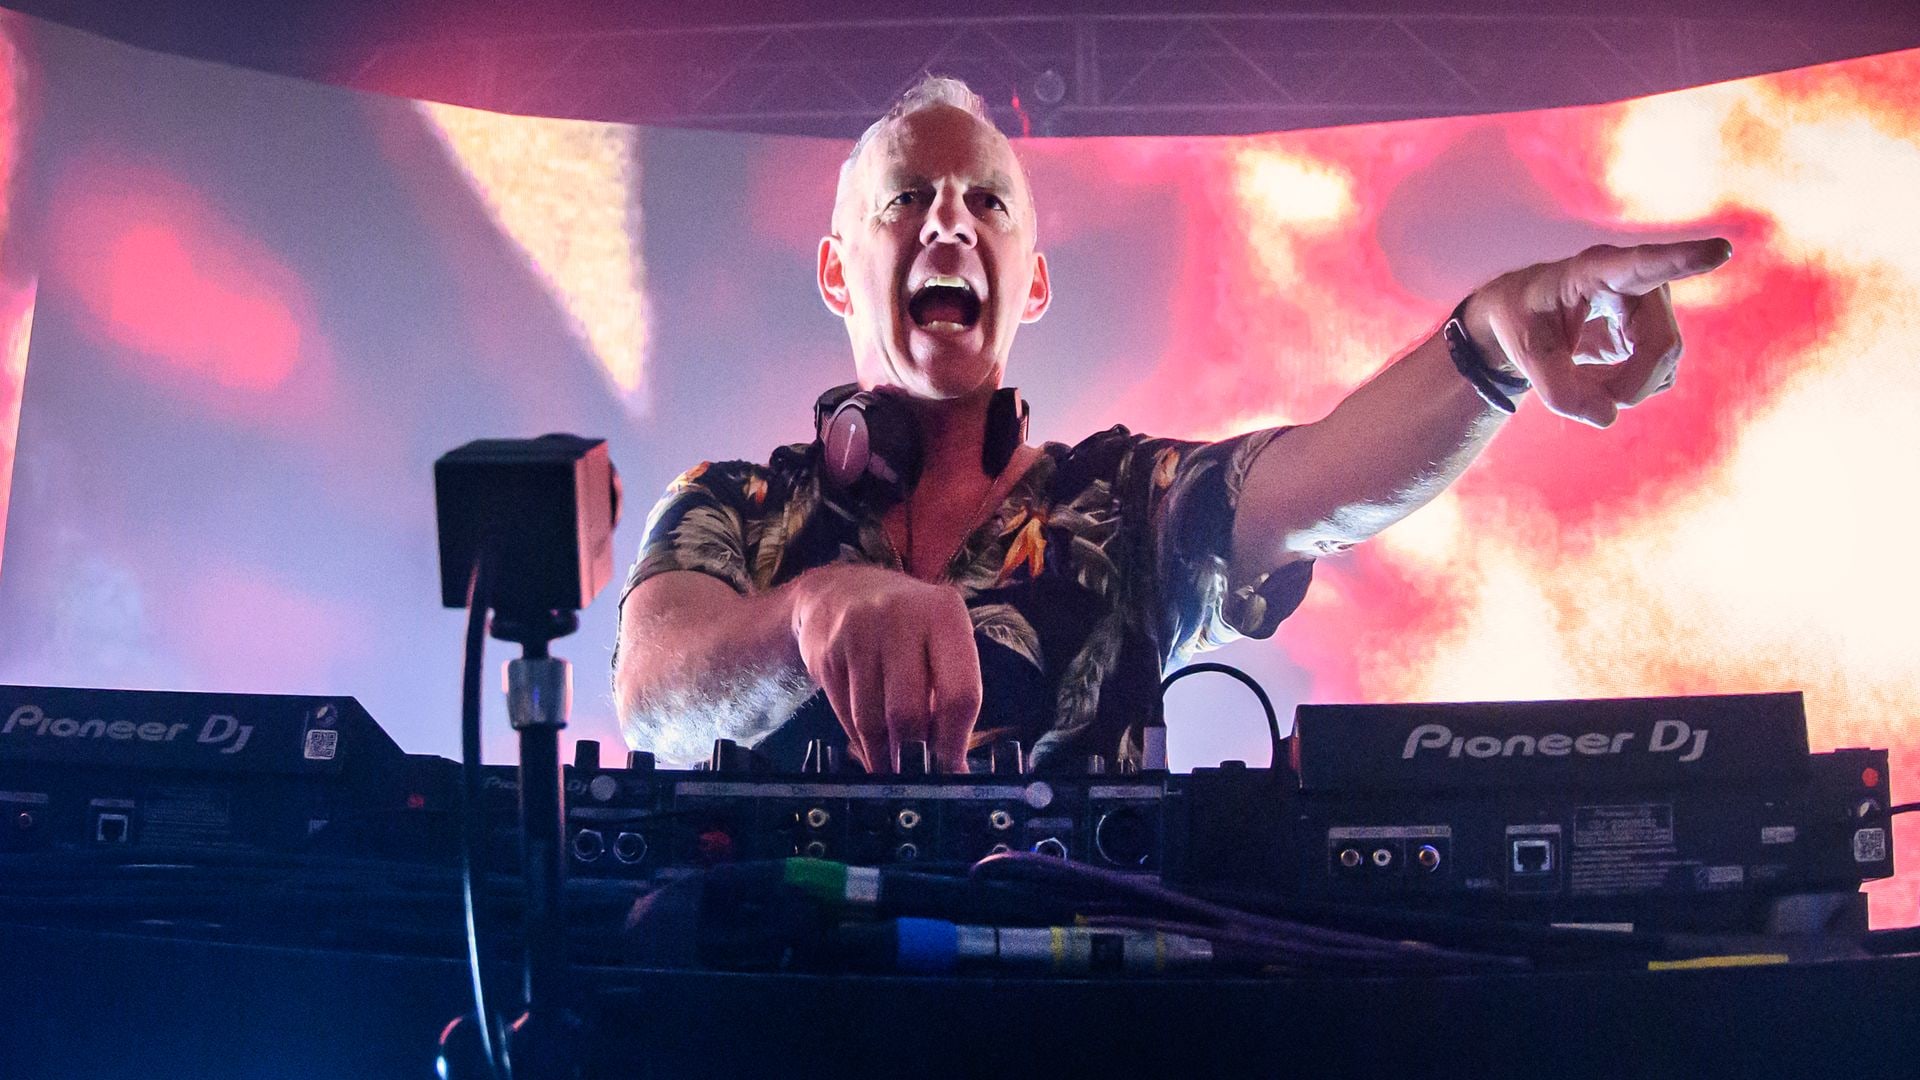 Fatboy Slim stood at a mixing deck pointing to the crowd and singing along